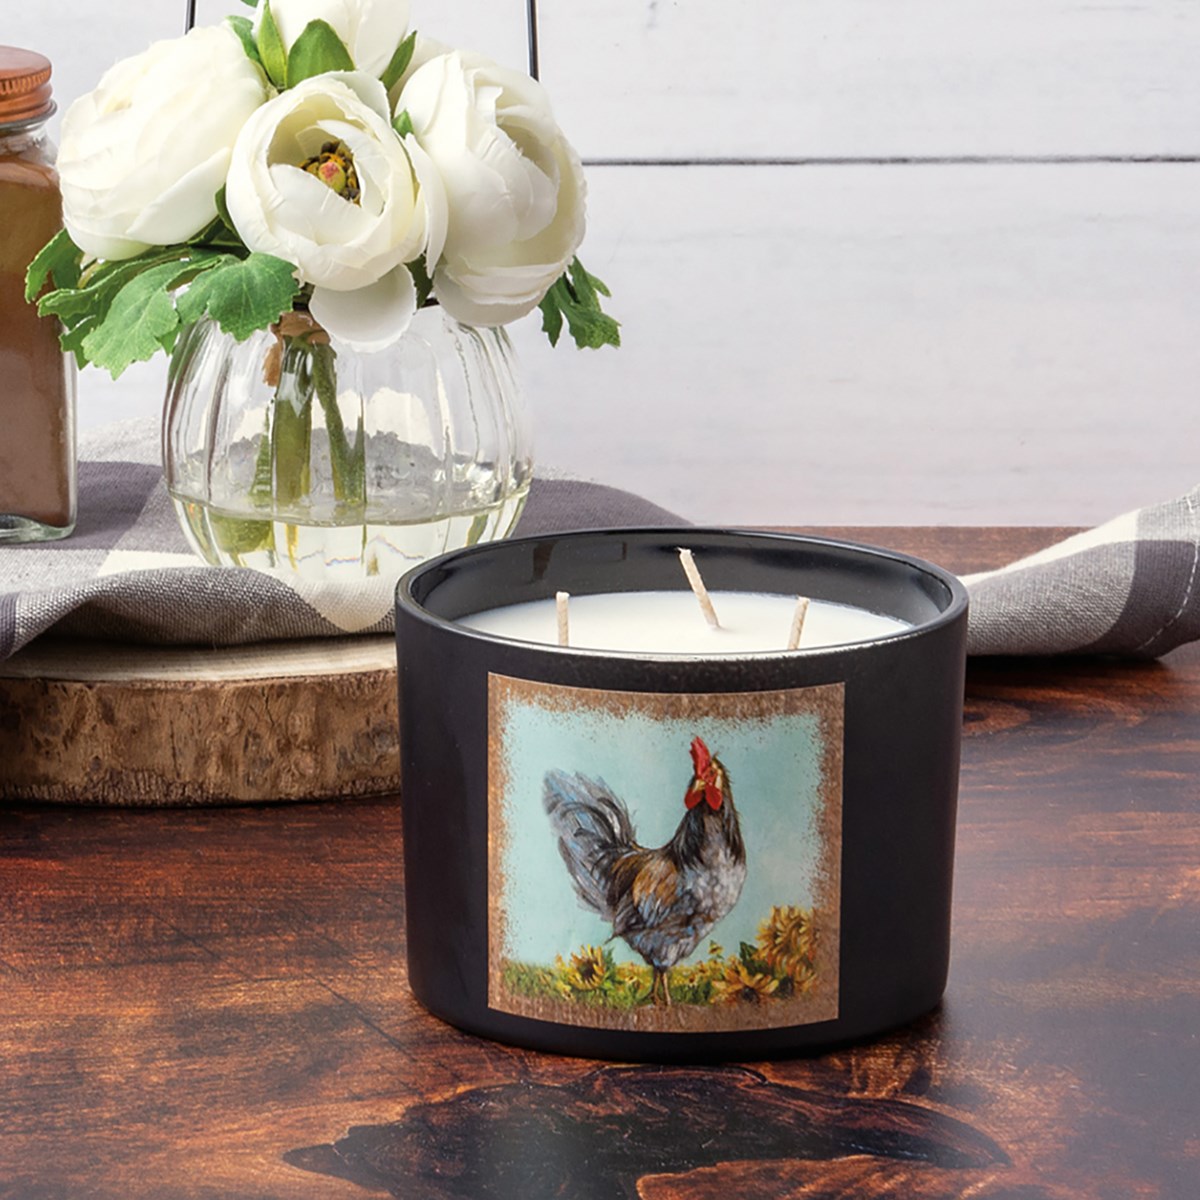 Rooster Candle - Soy Wax, Glass, Cotton